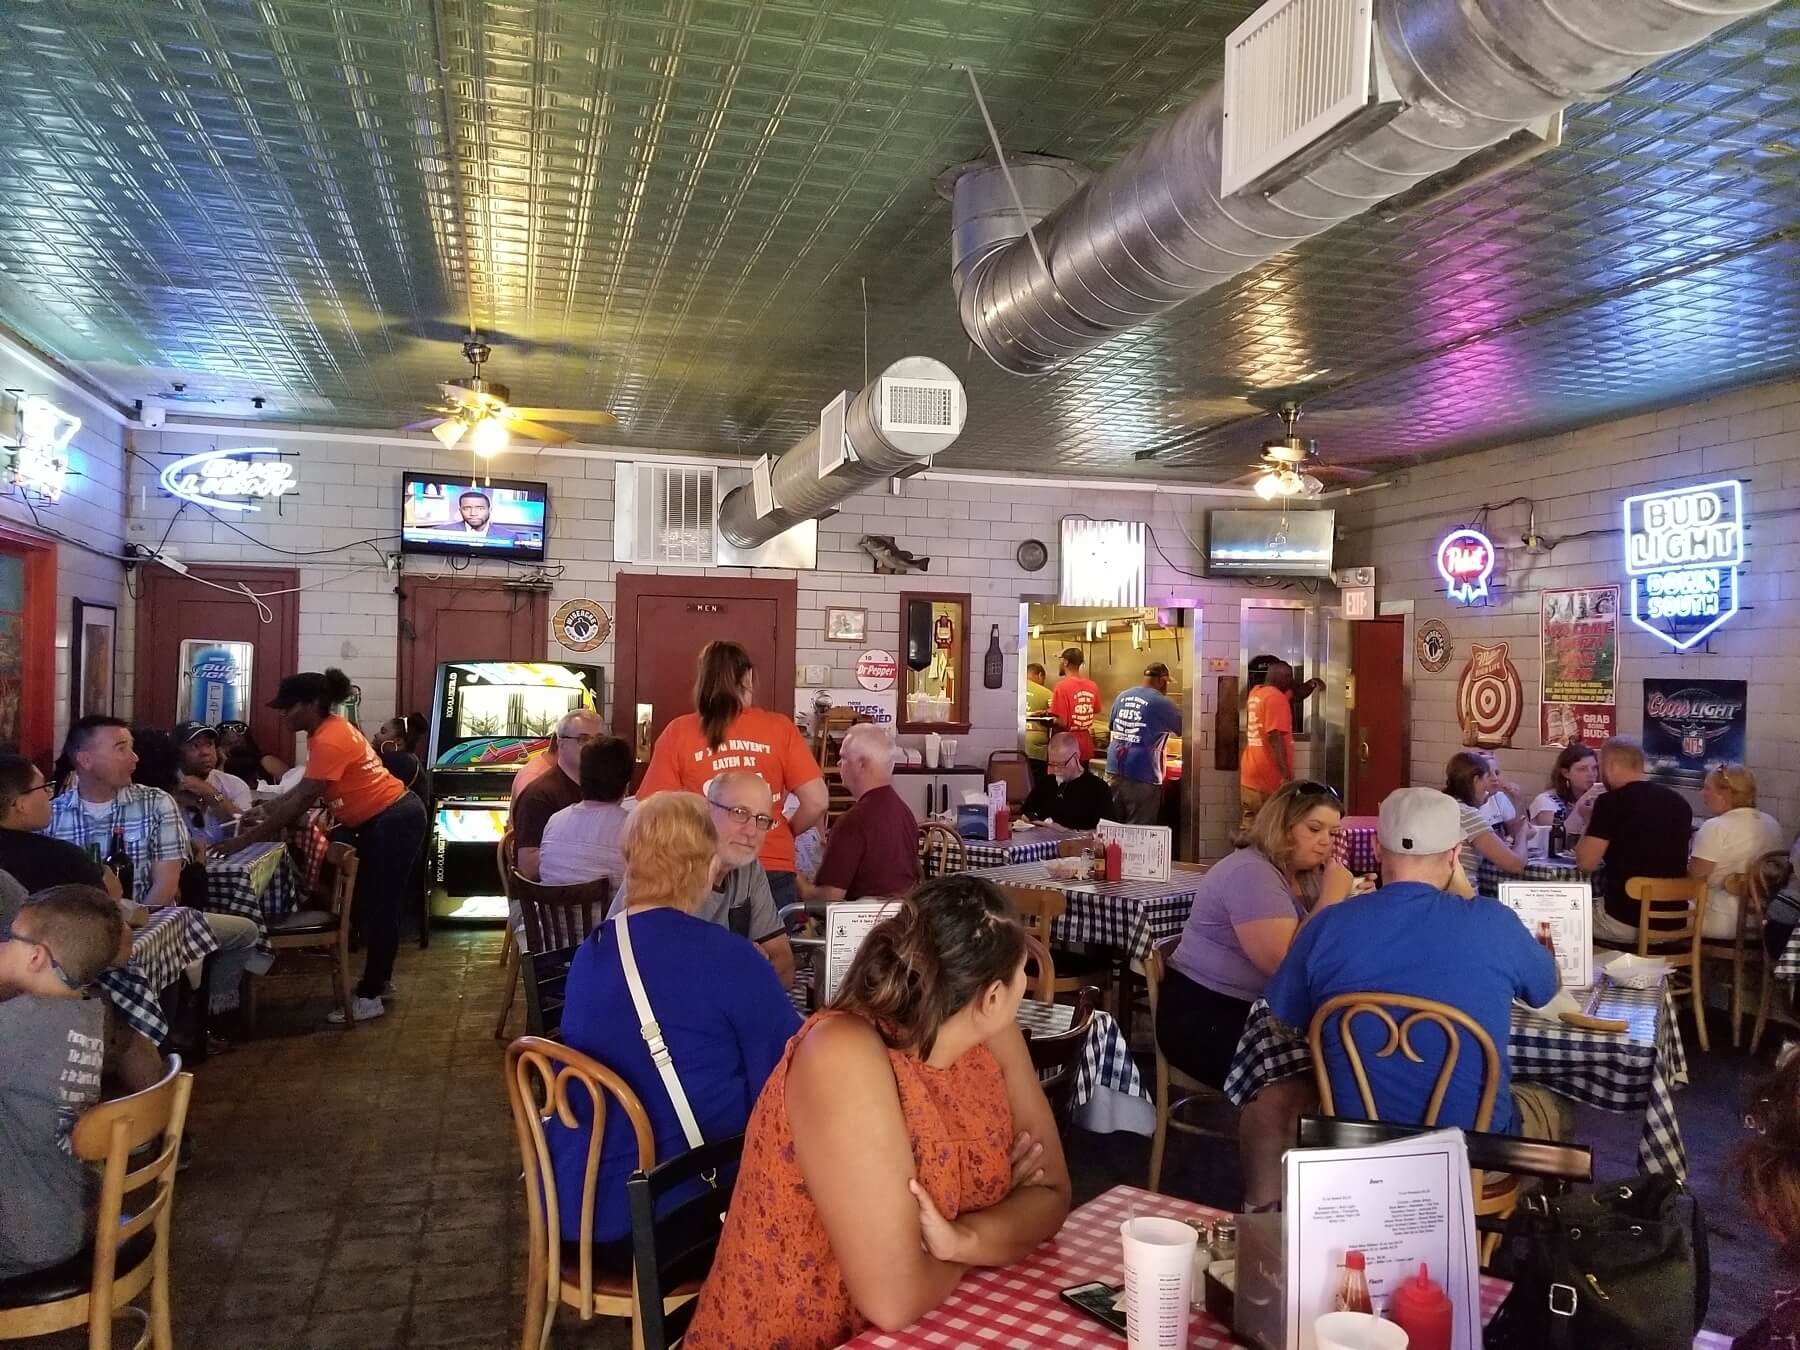 People eating inside Gus's Fried Chicken on Front Street in Memphis, TN.